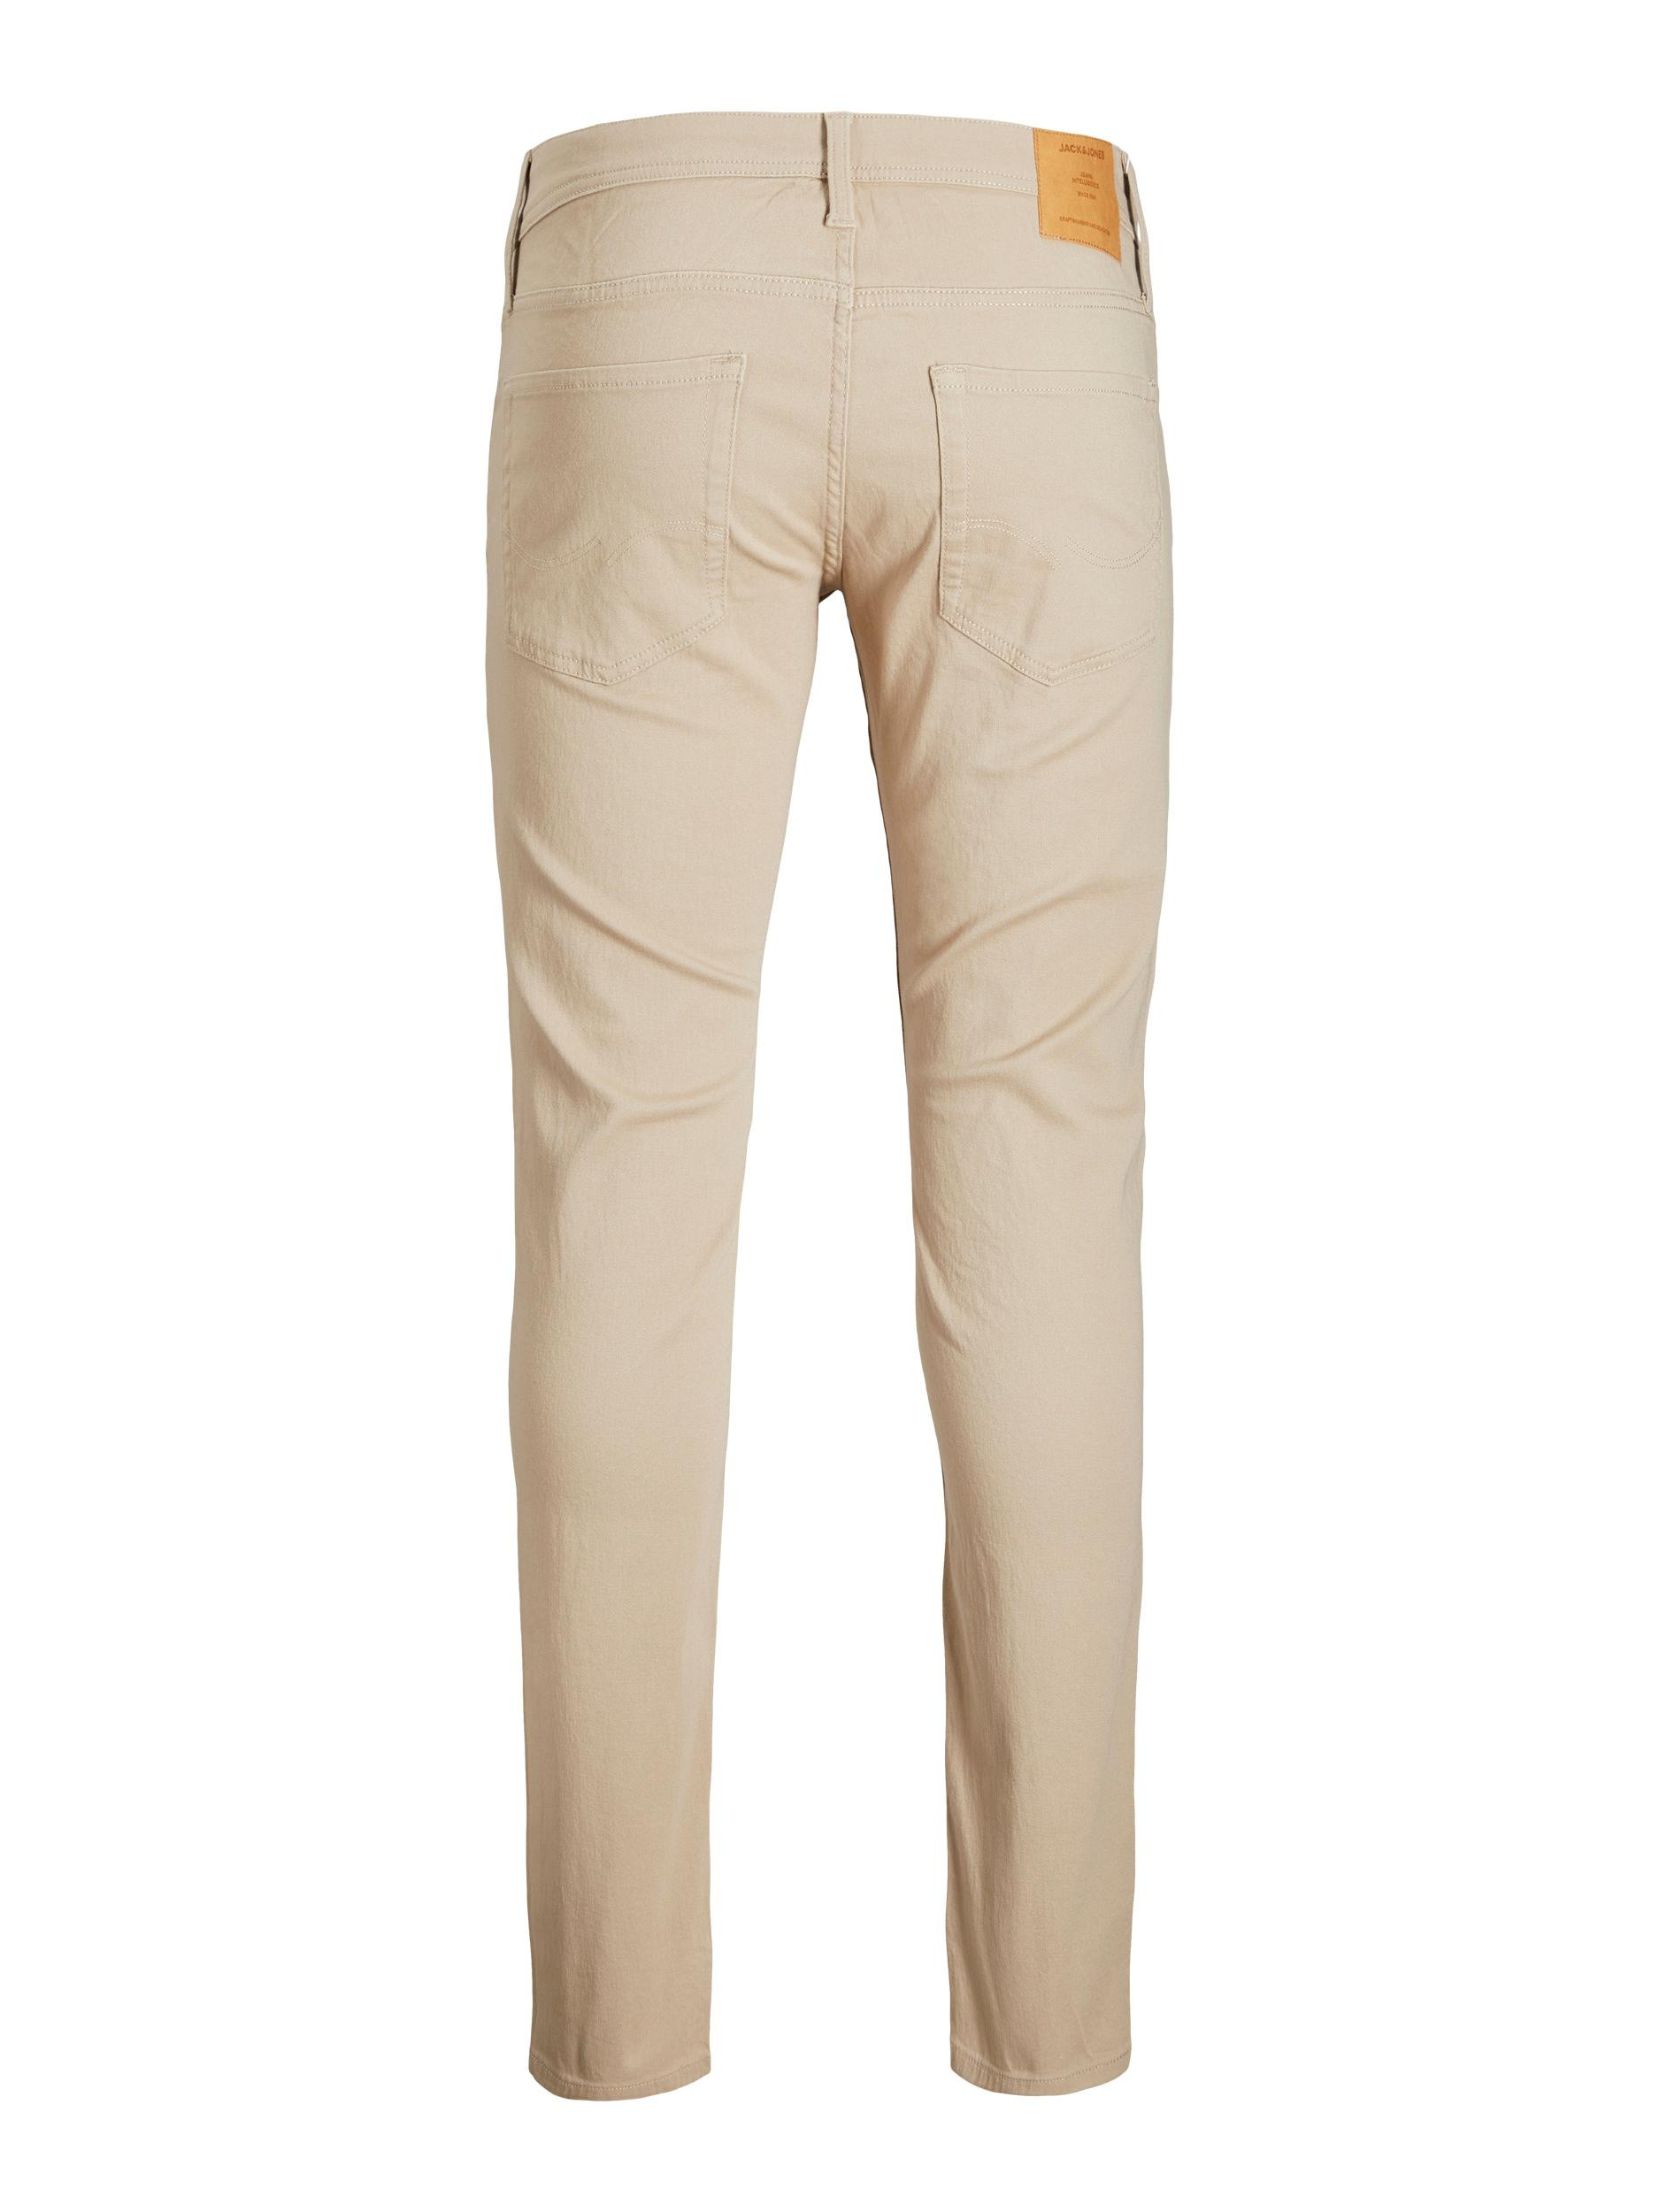 Trousers, Beige, large image number 1